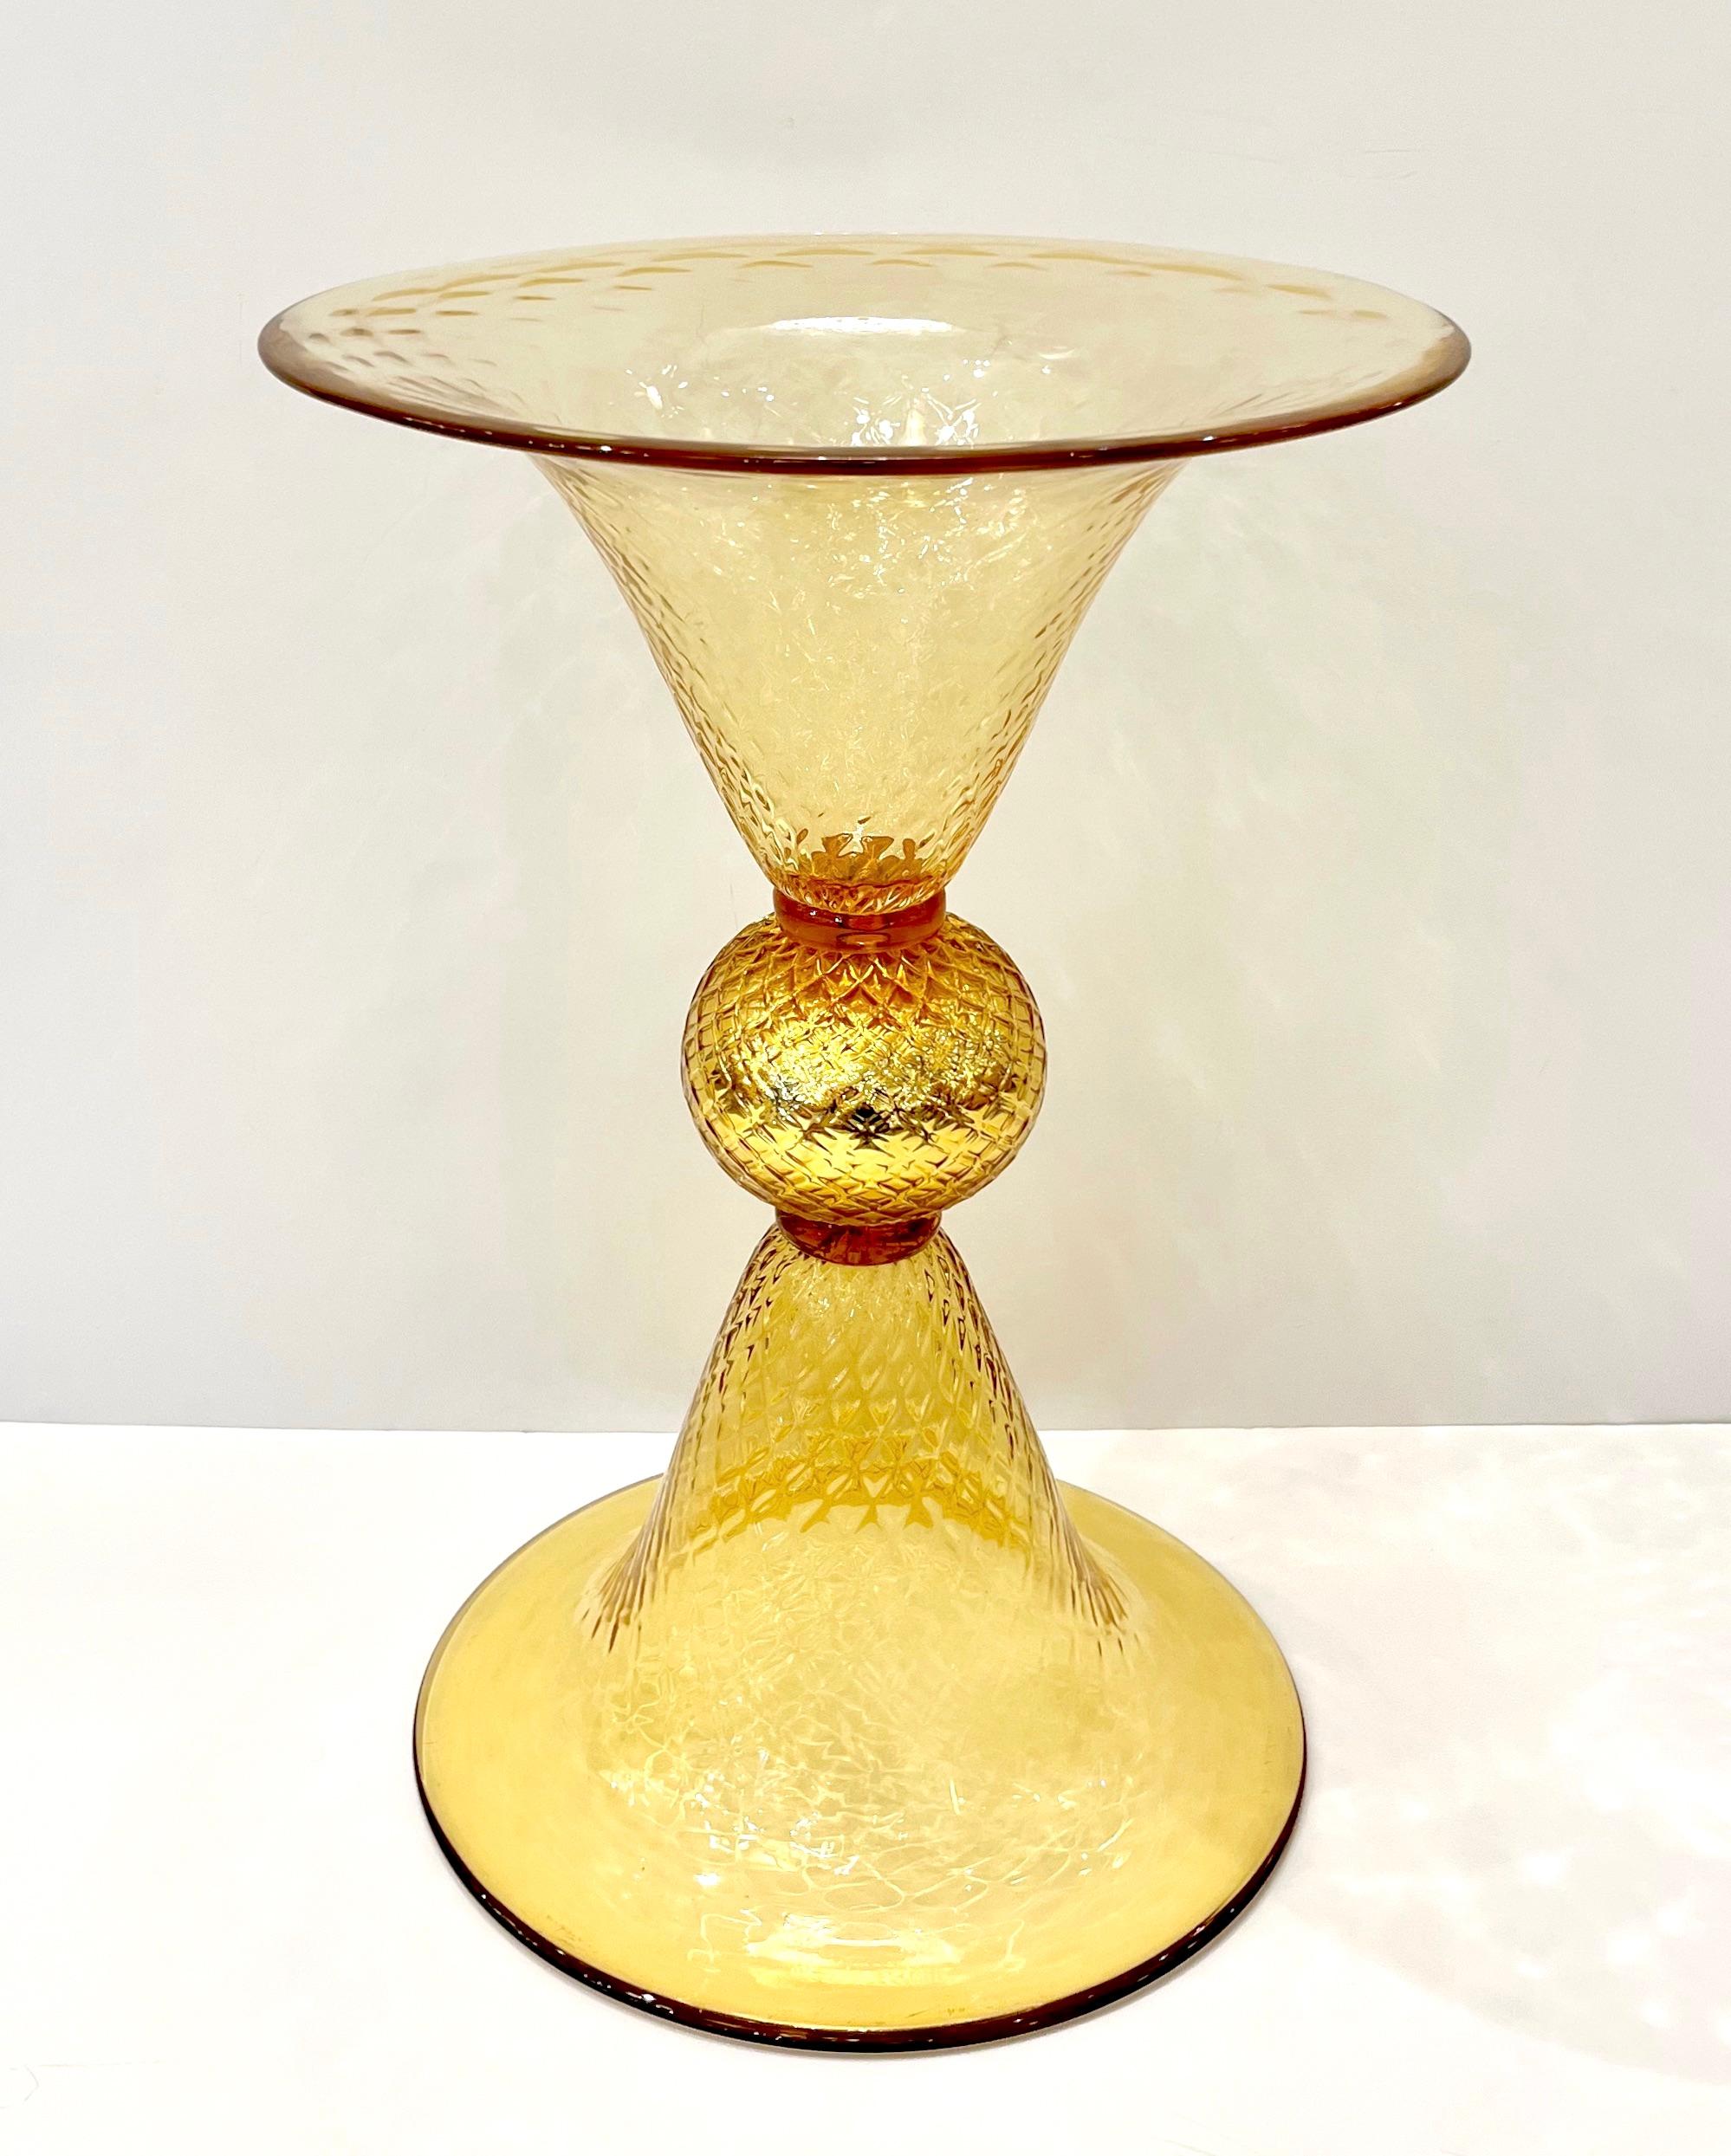 Contemporary Venetian Decorative Arts gold vase, in blown Murano glass, worked with pure 24k gold, the bottom and top parts can both function as the base. The body is in textured glass with a honeycomb pattern that multiplies reflections and